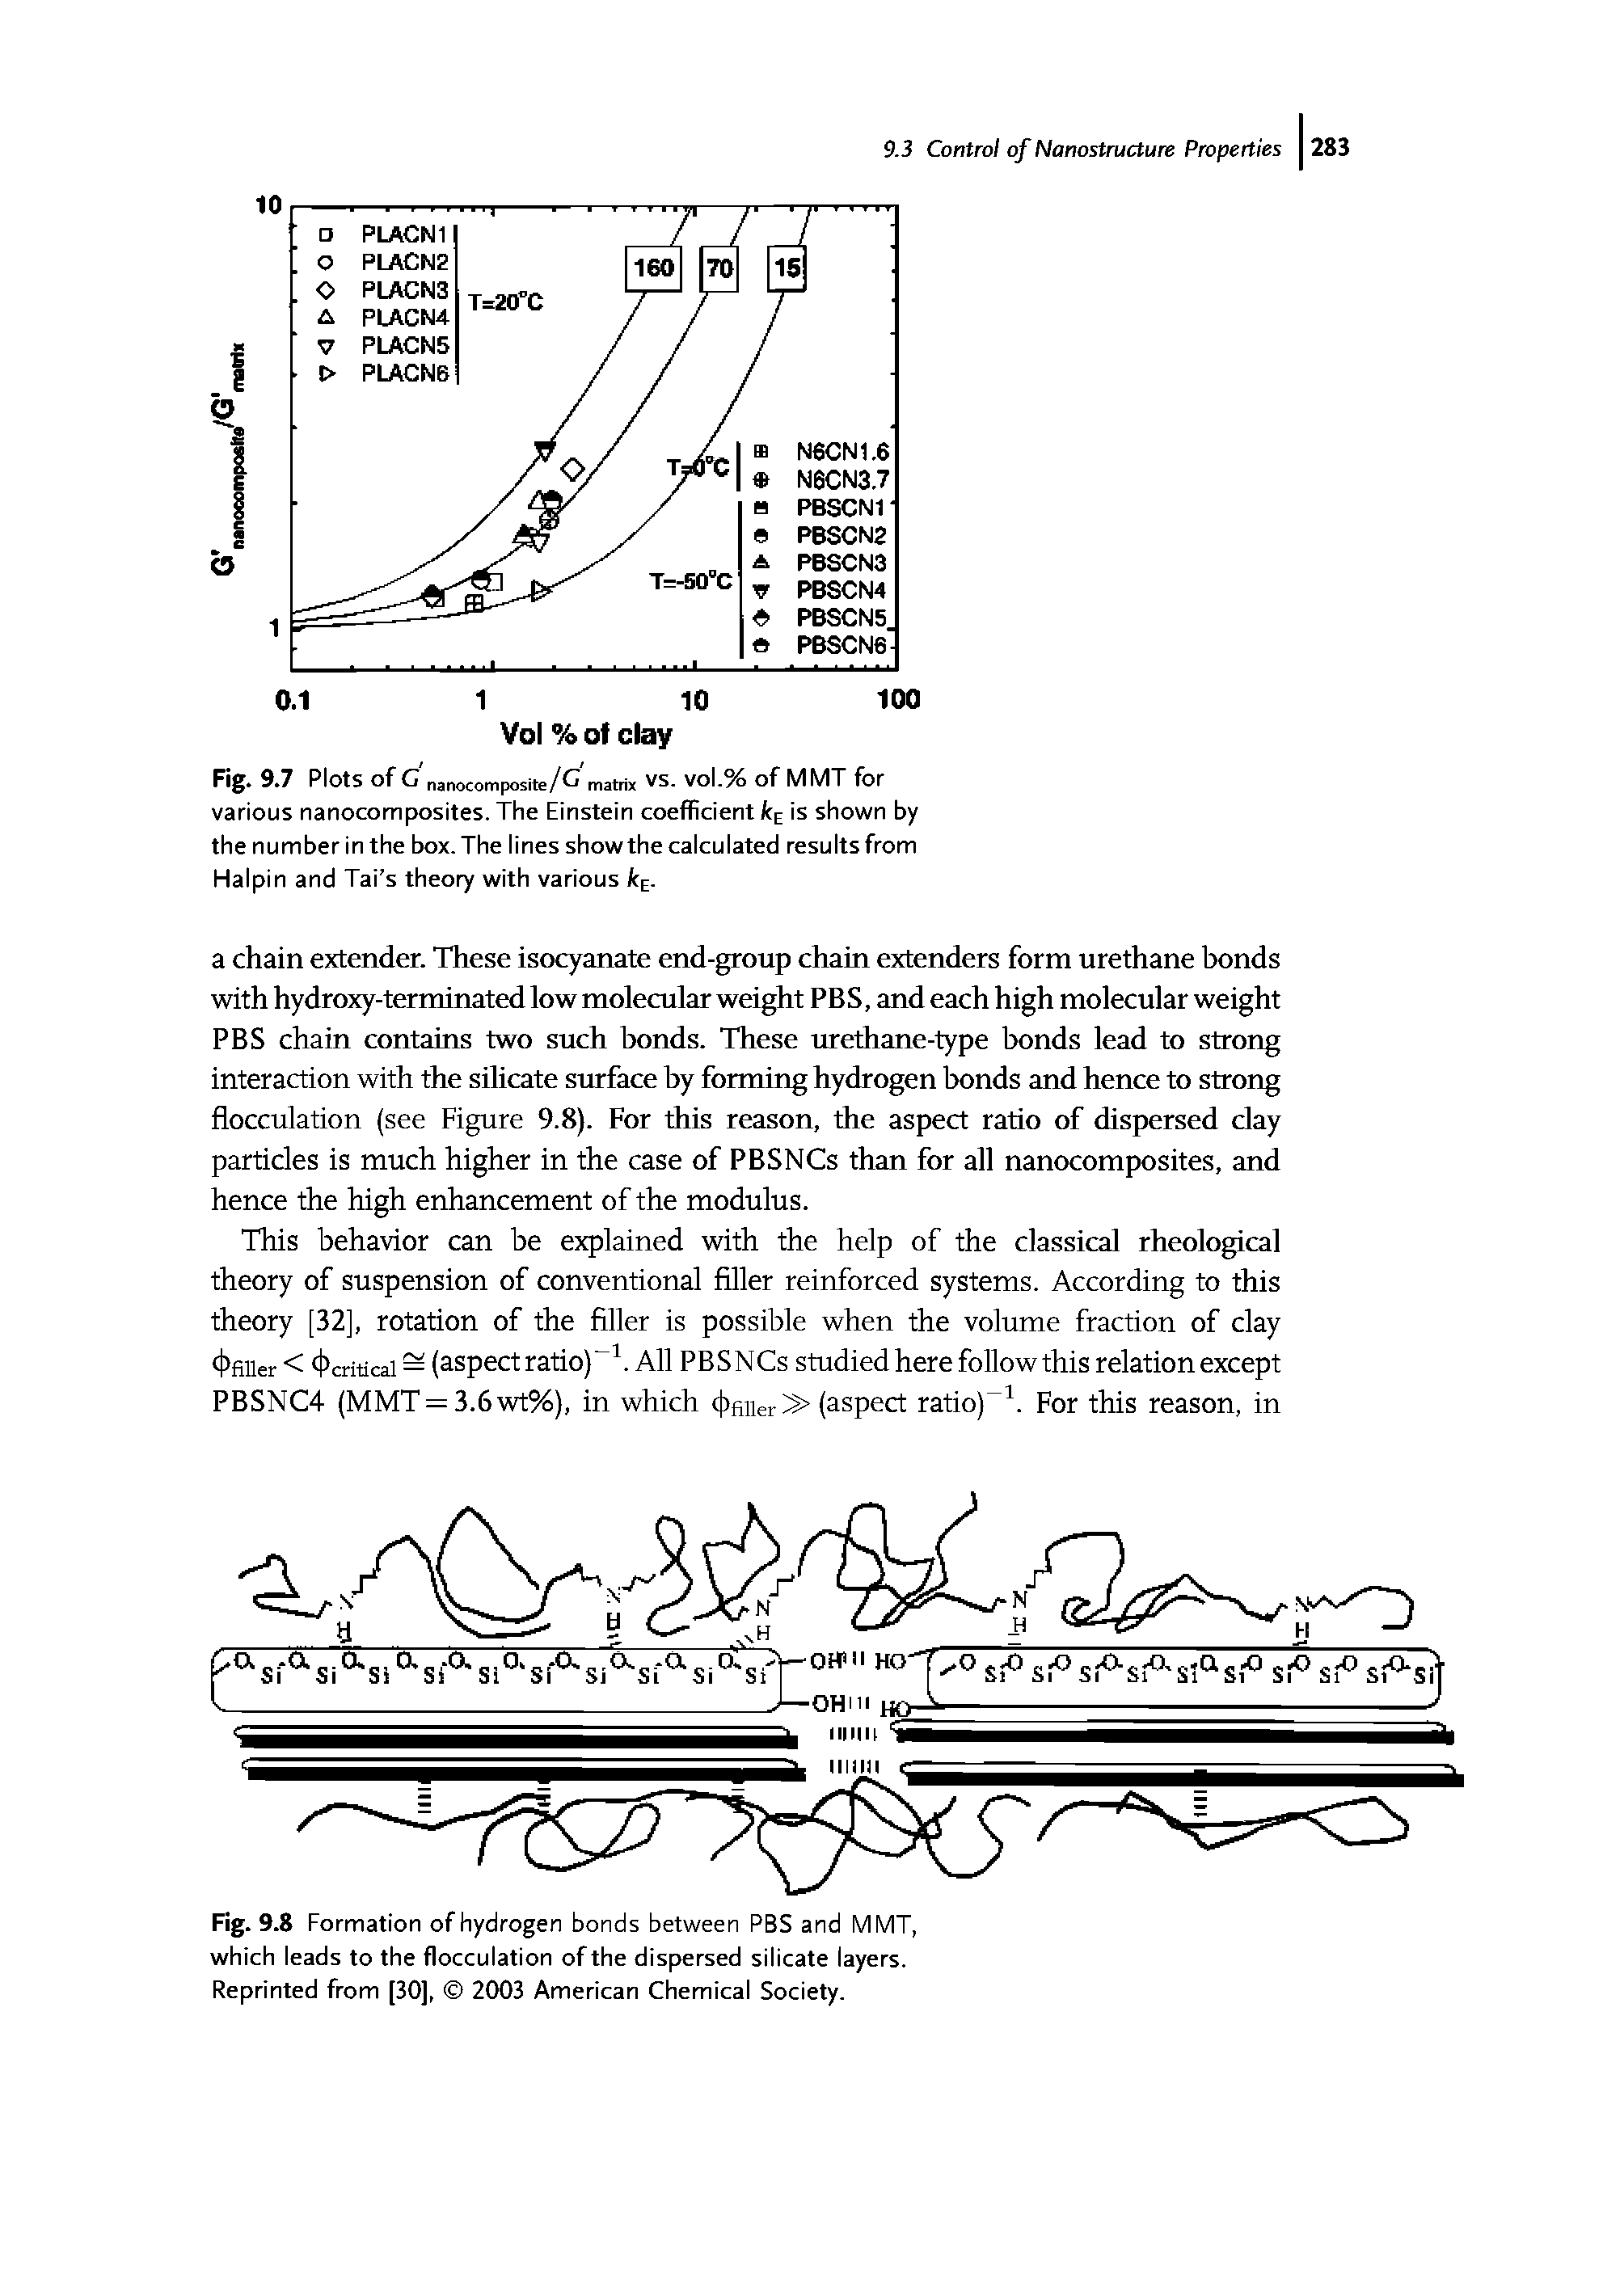 Fig. 9.8 Formation of hydrogen bonds between PBS and MMT, which leads to the flocculation of the dispersed silicate layers. Reprinted from [30], 2003 American Chemical Society.